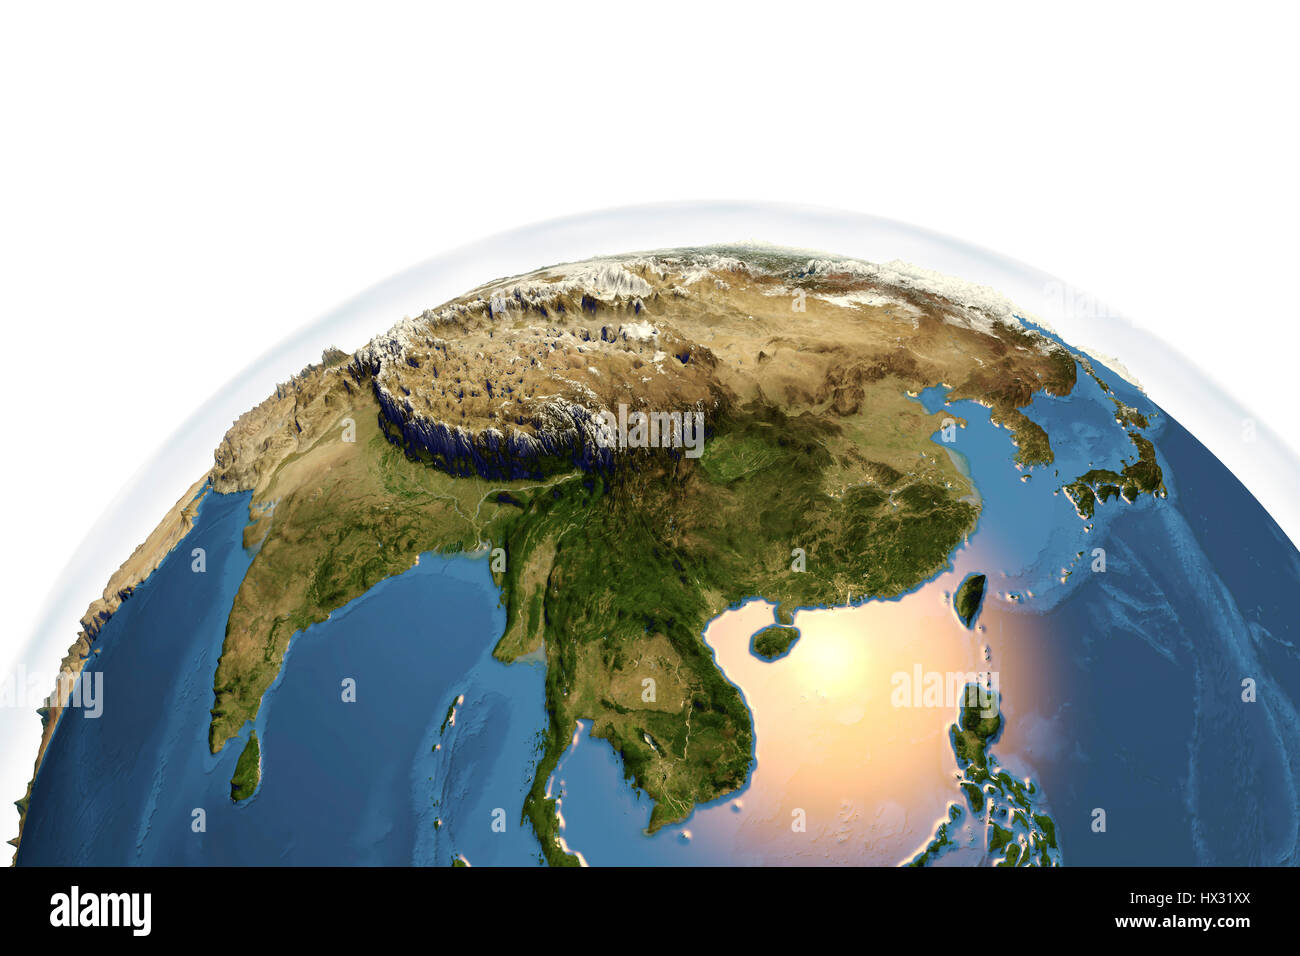 Earth from space. Computer illustration showing the Earth as viewed from space, centred over Asia. Stock Photo